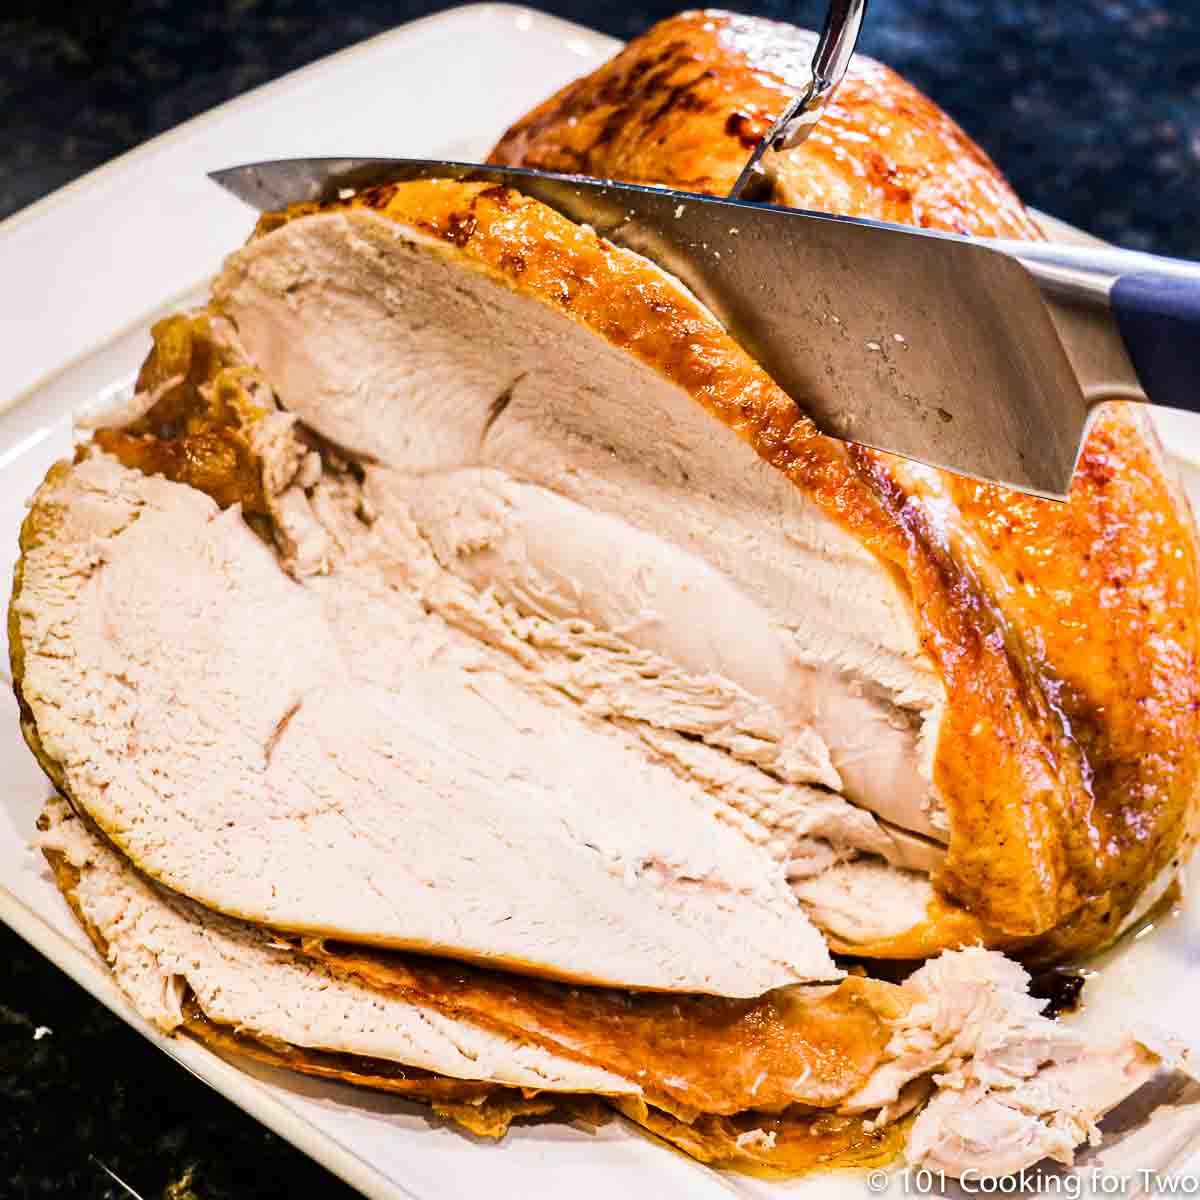 How To Roast Turkey Breast With Gravy 101 Cooking For Two,How To Make Copyright Symbol In Word